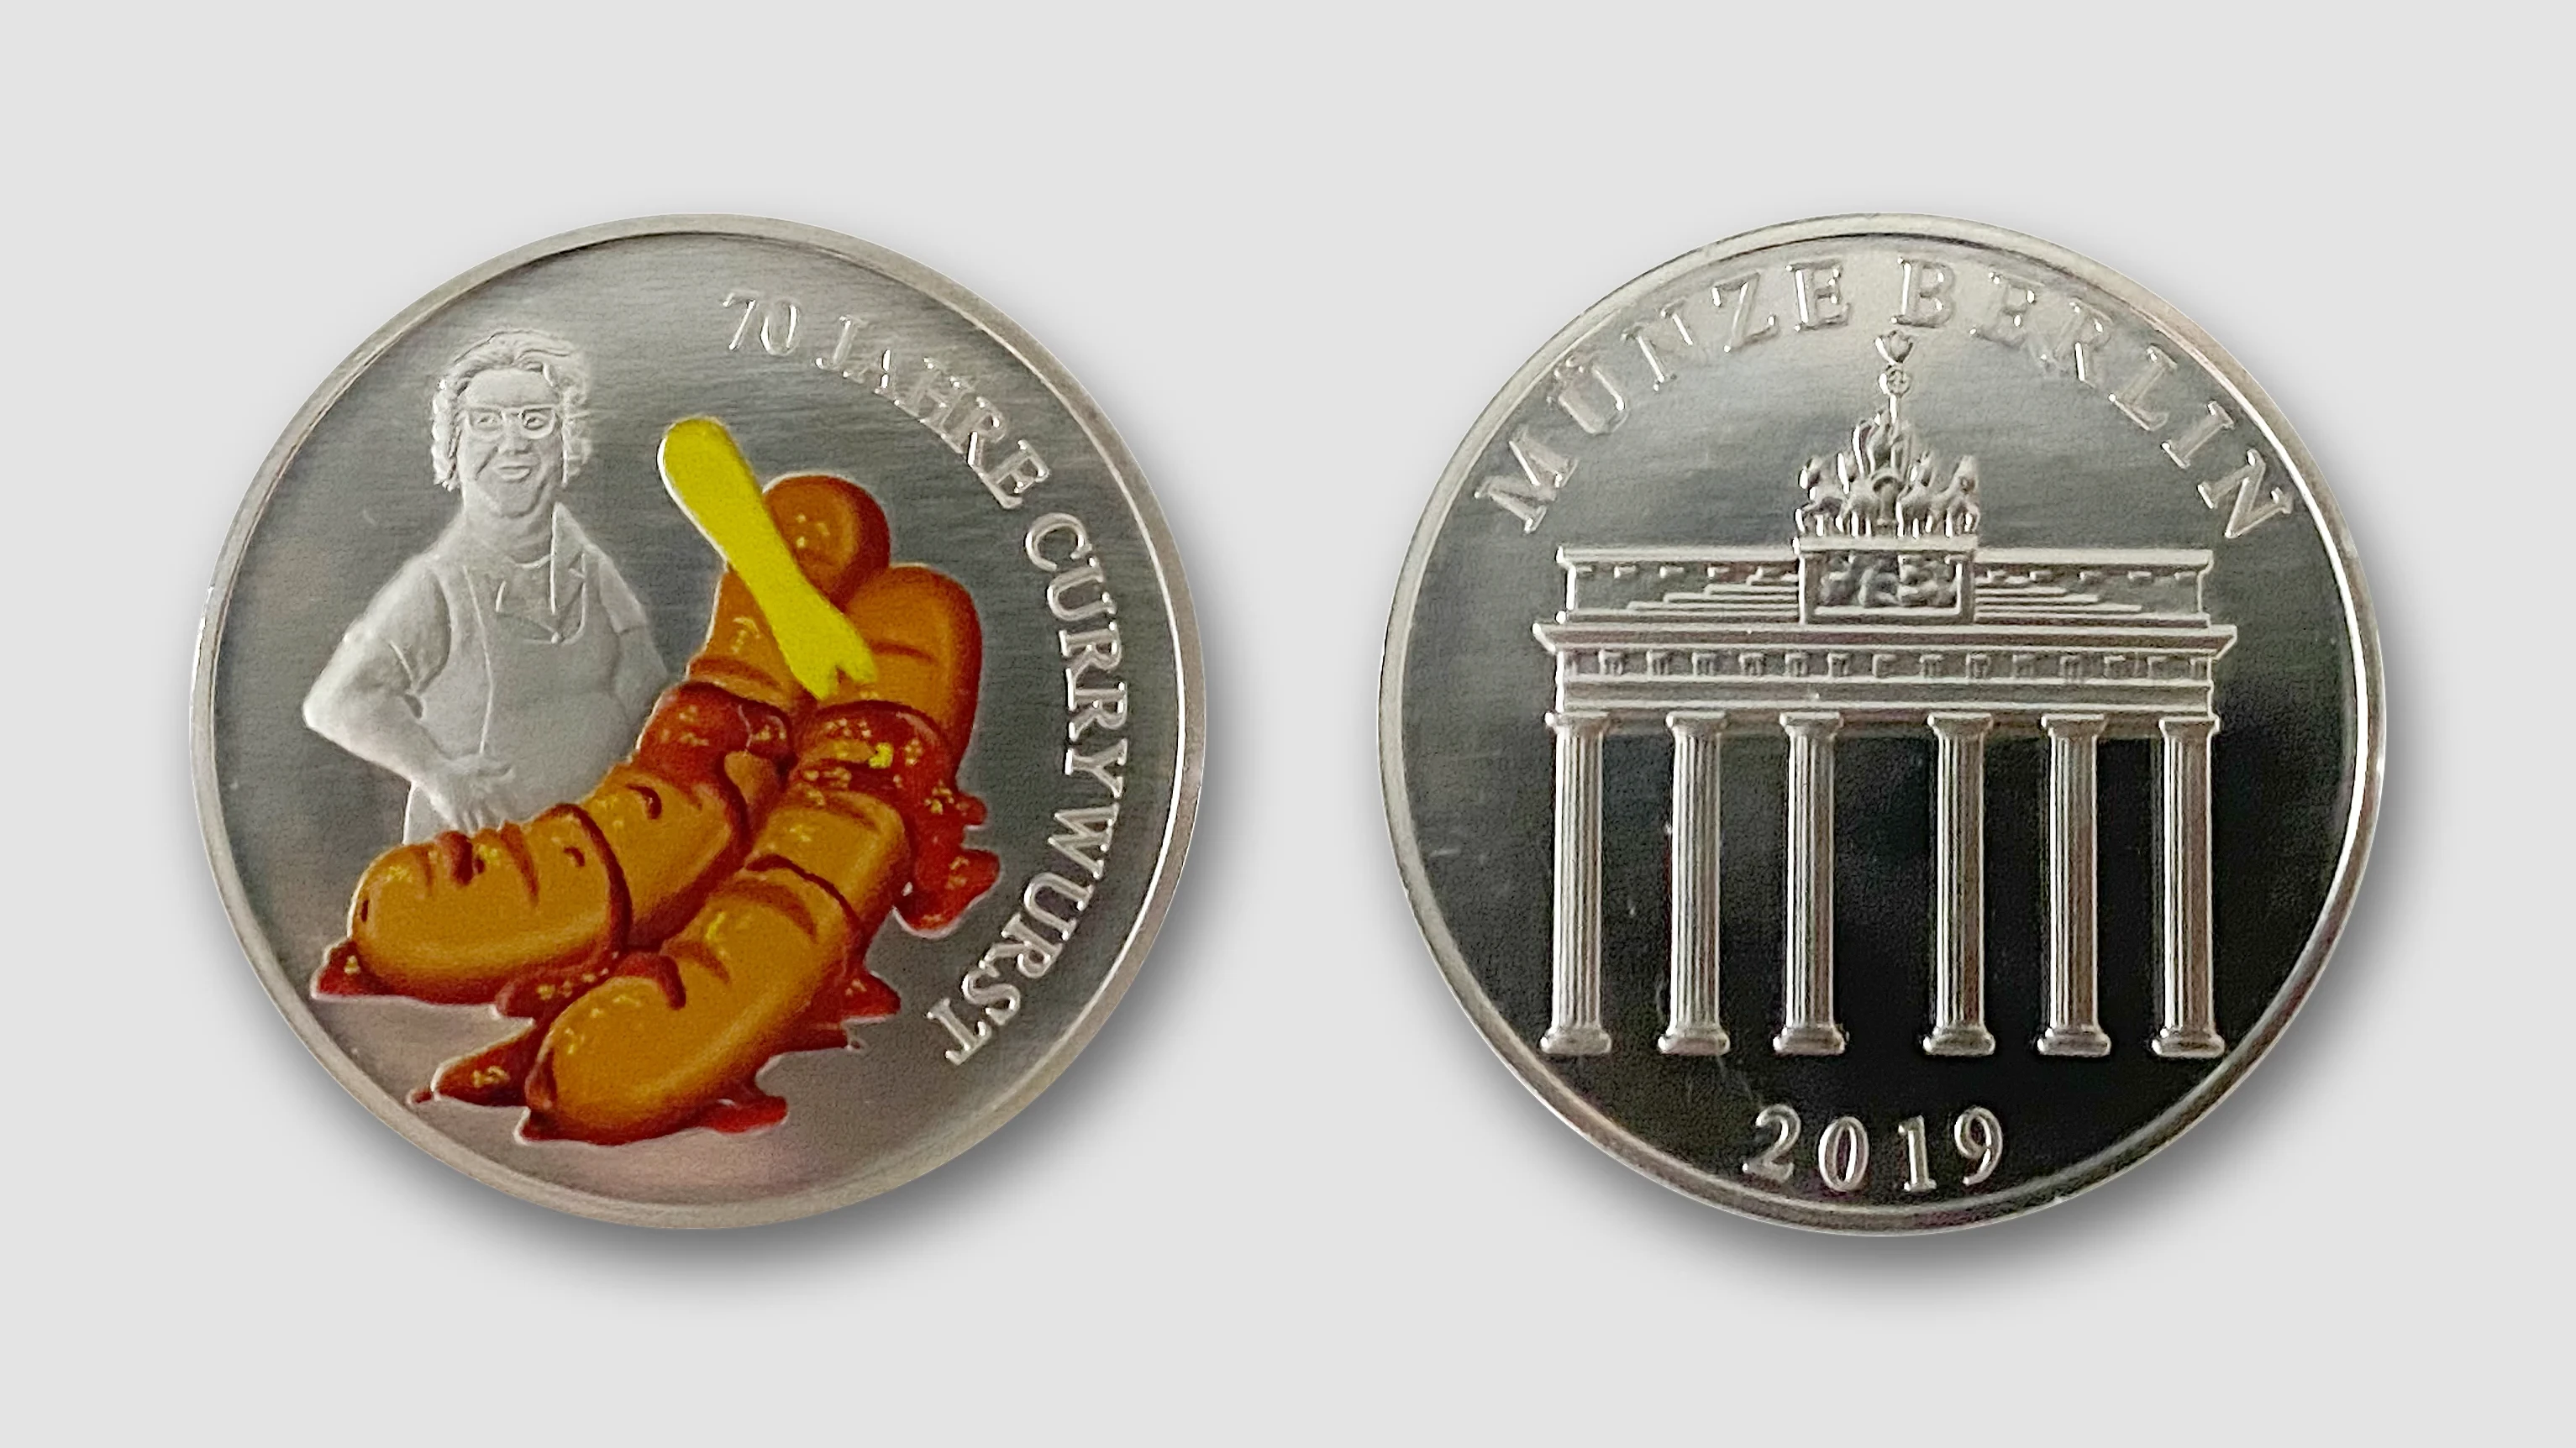 70th currywurst anniversary coin